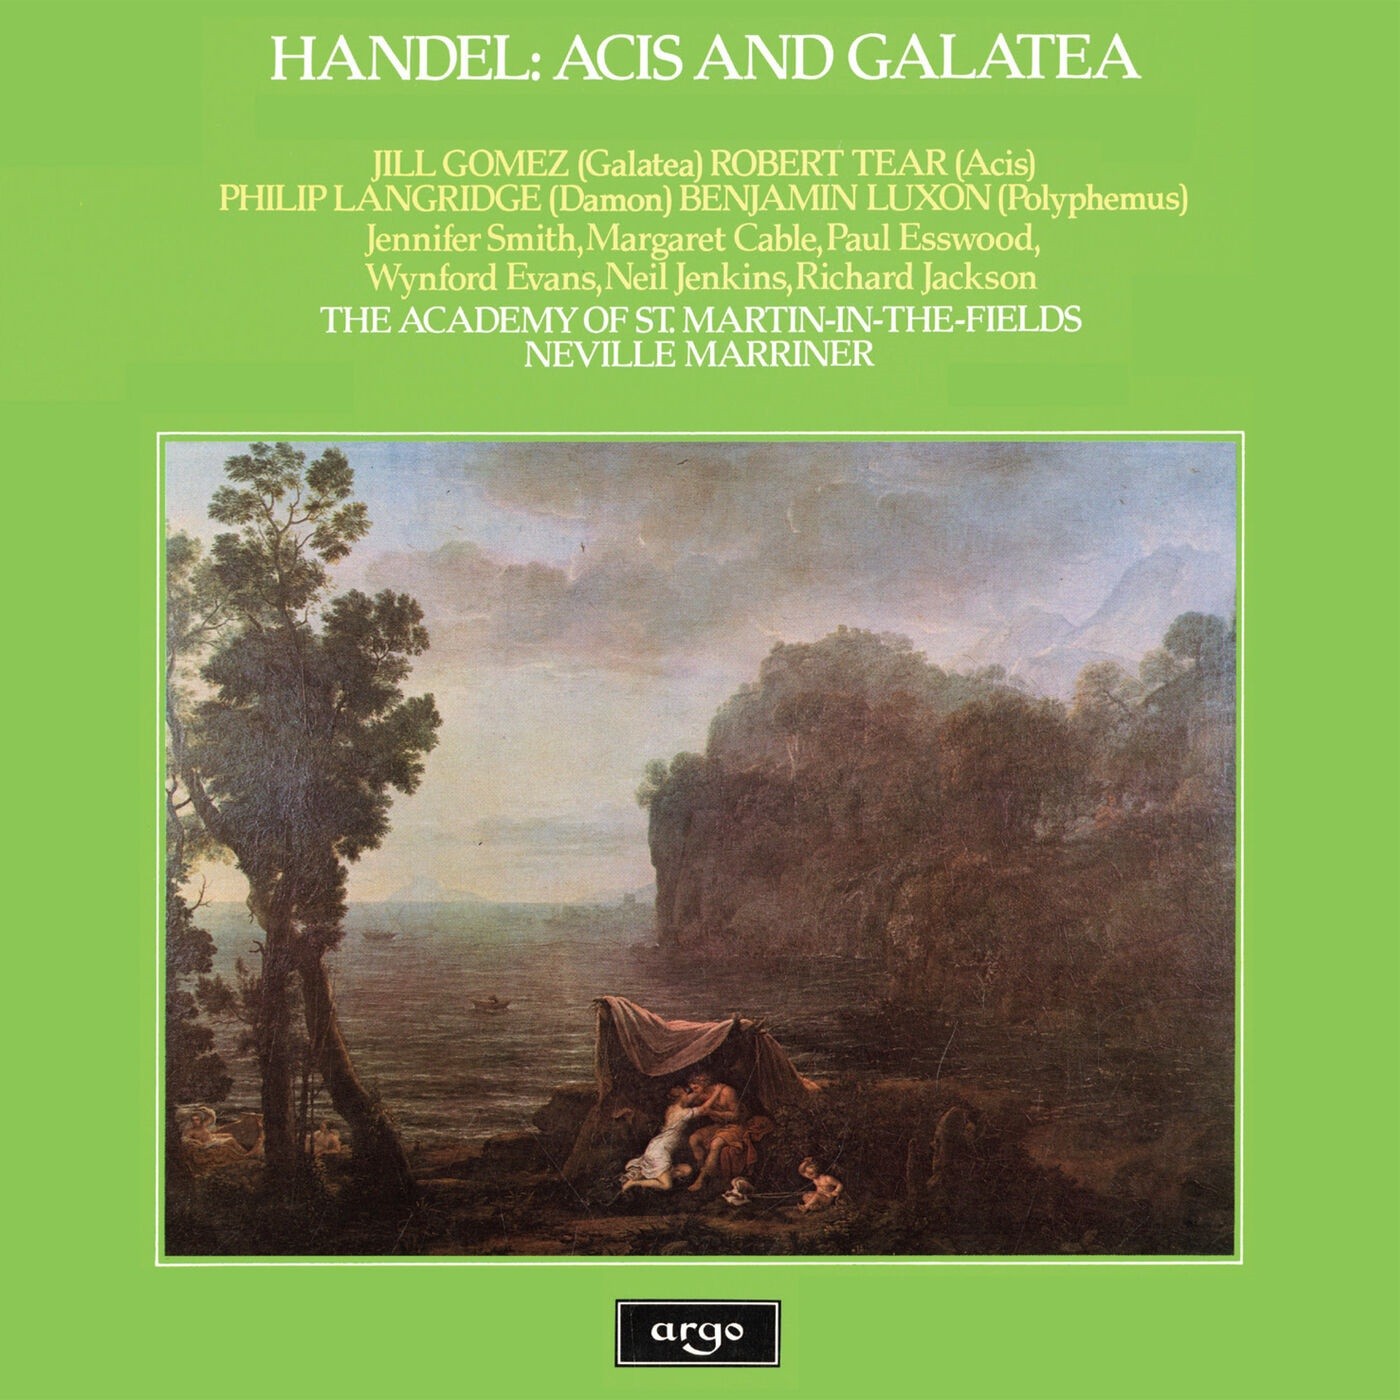 Academy of St. Martin in the Fields, Sir Neville Marriner - Handel: Acis and Galatea (1978/2024) [FLAC 24bit/48kHz]